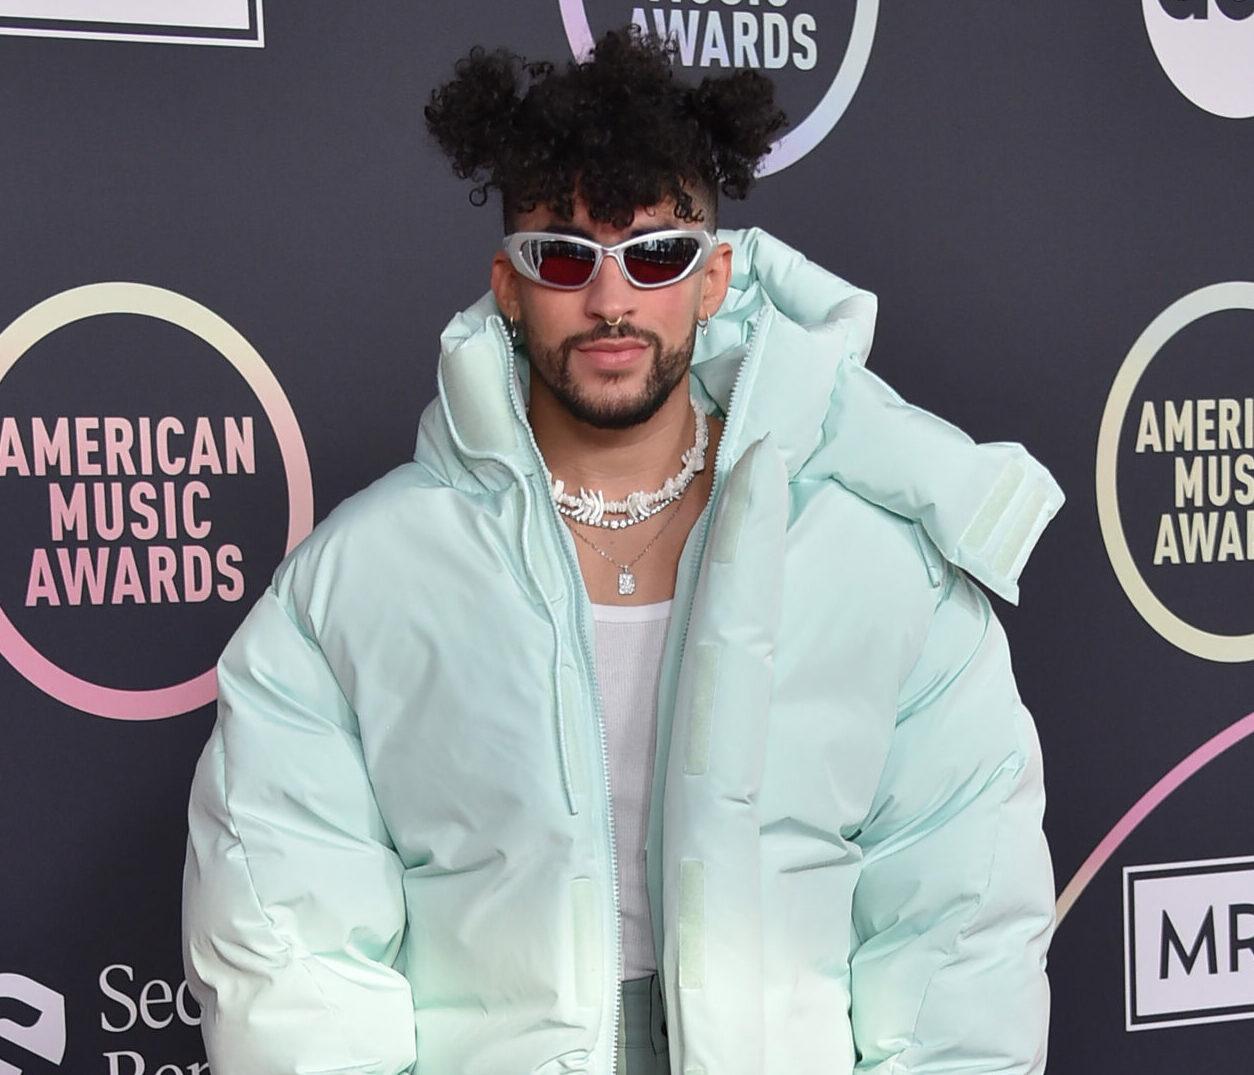 Bad Bunny At The 2021 American Music Awards held at the Microsoft Theatre on November 21, 2021 in Los Angeles, CA.